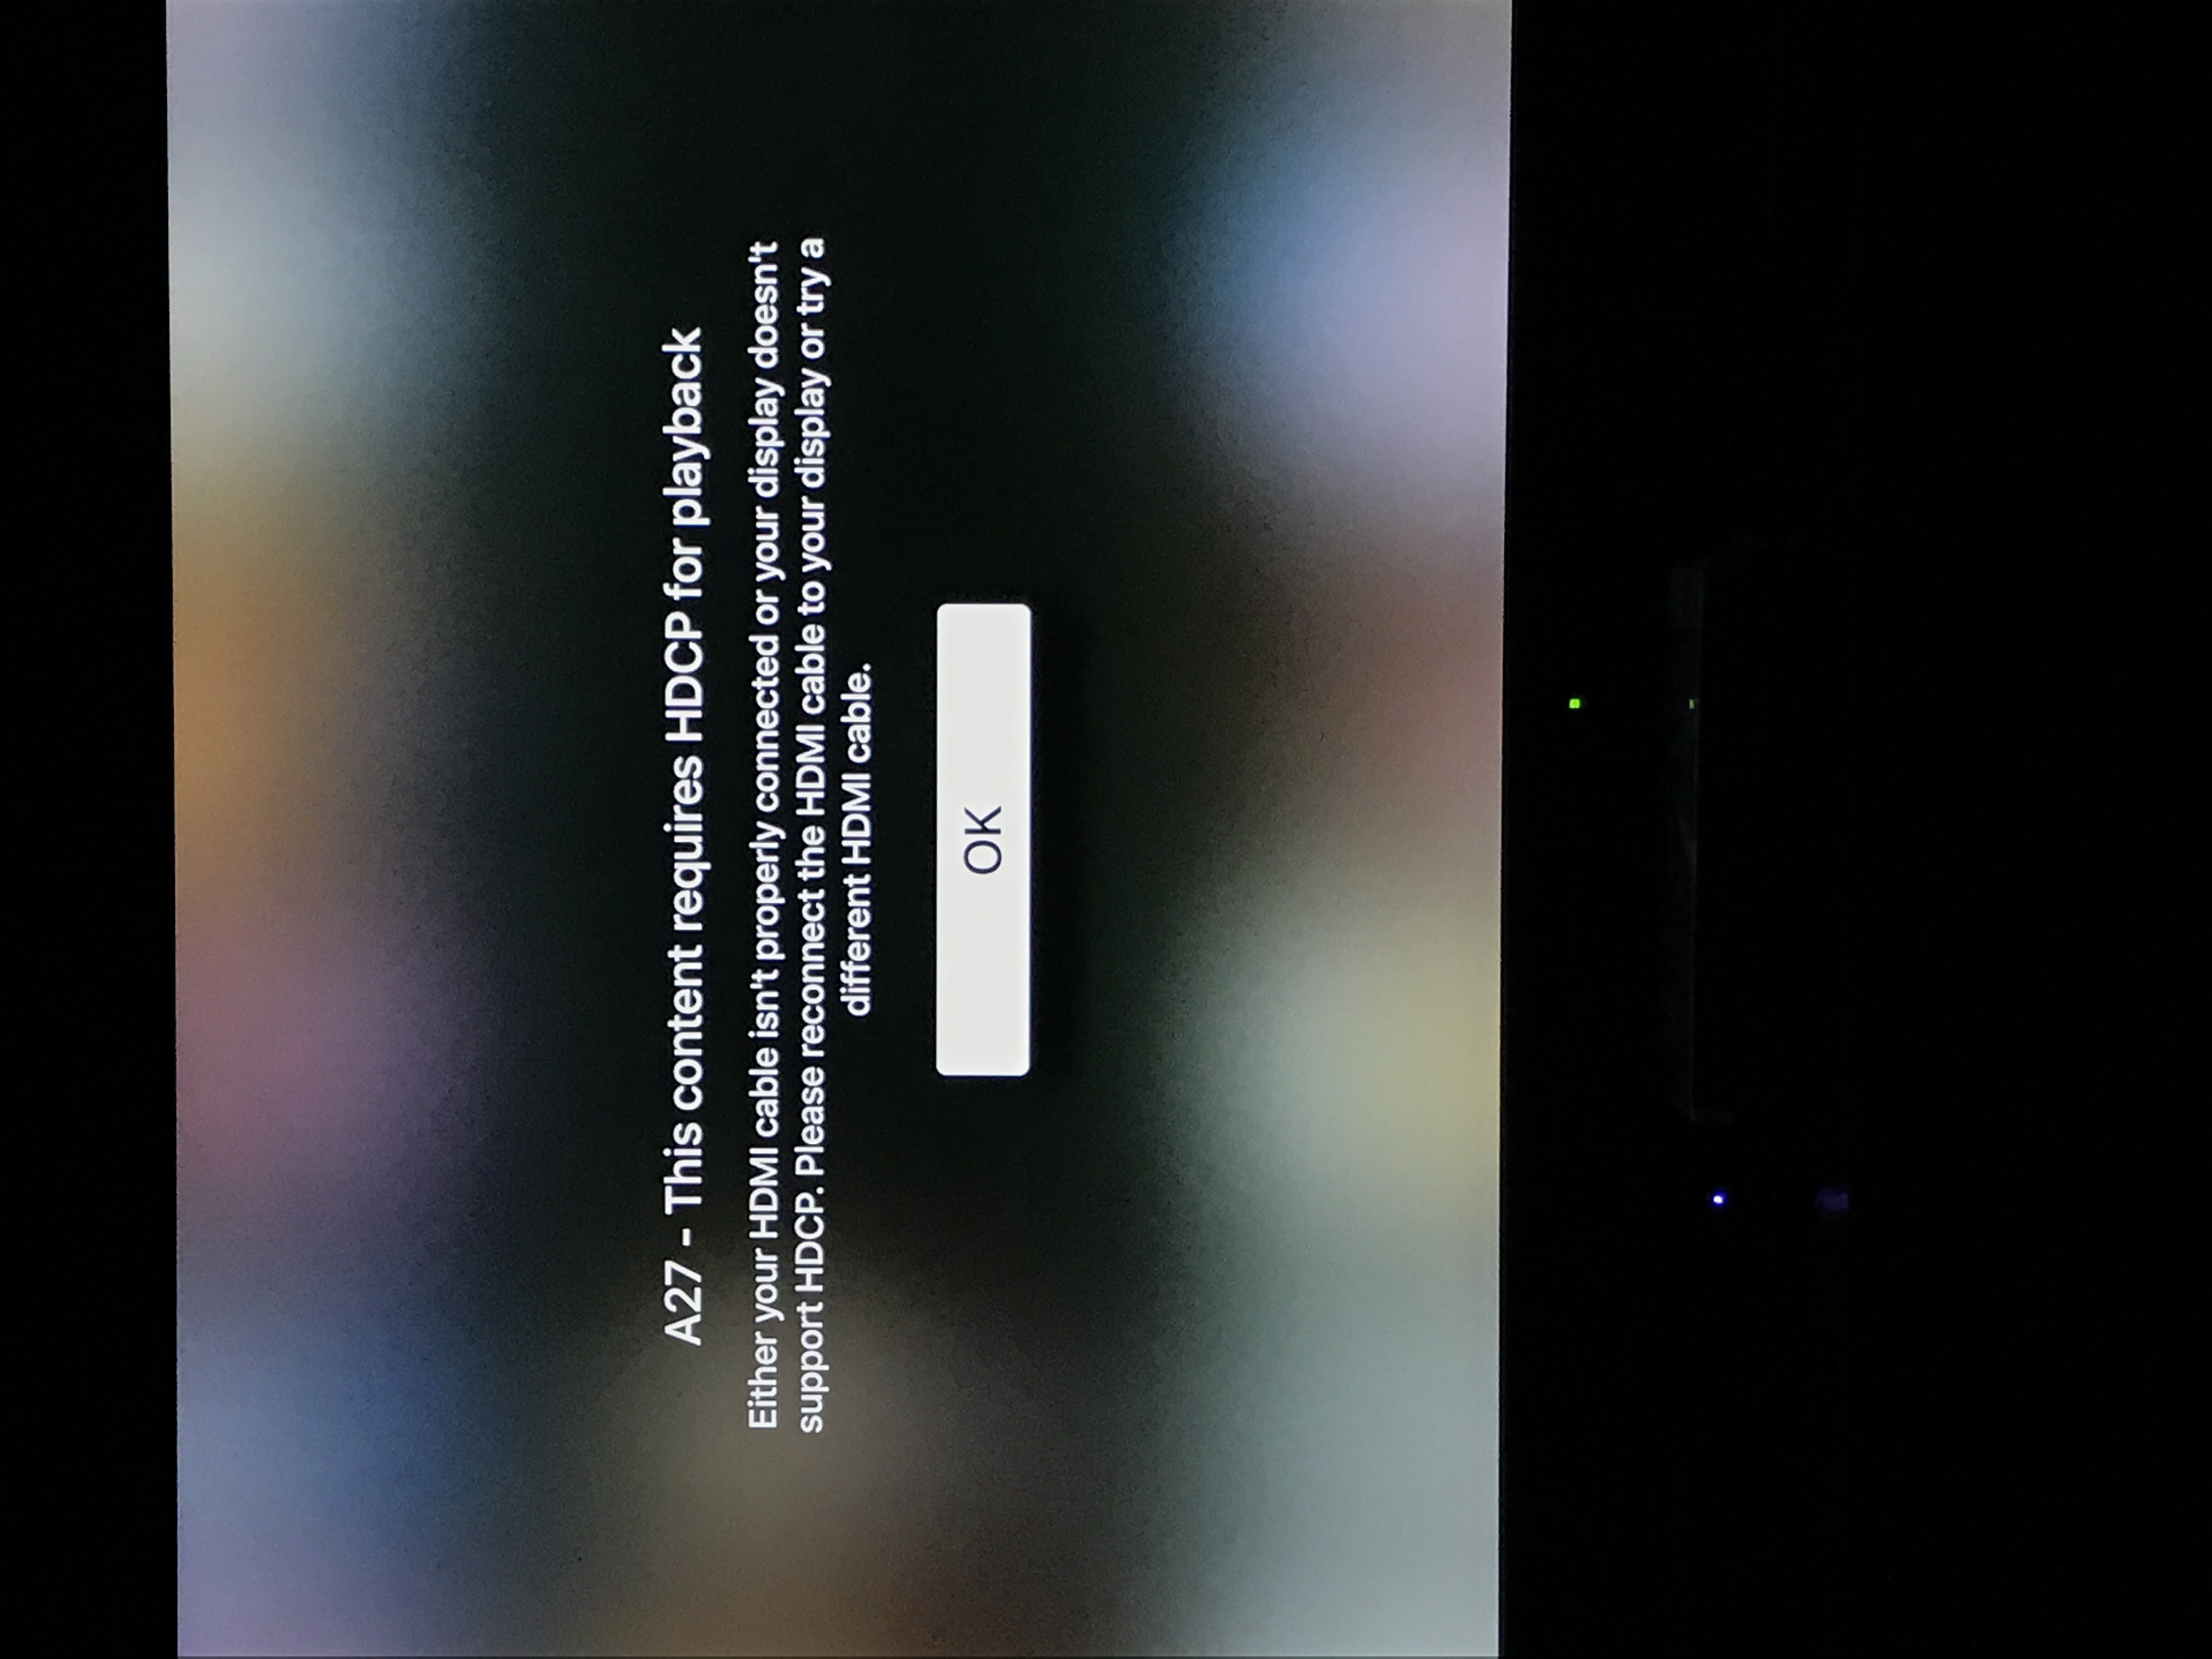 My Apple TV keeps up with A27 HDCP… -